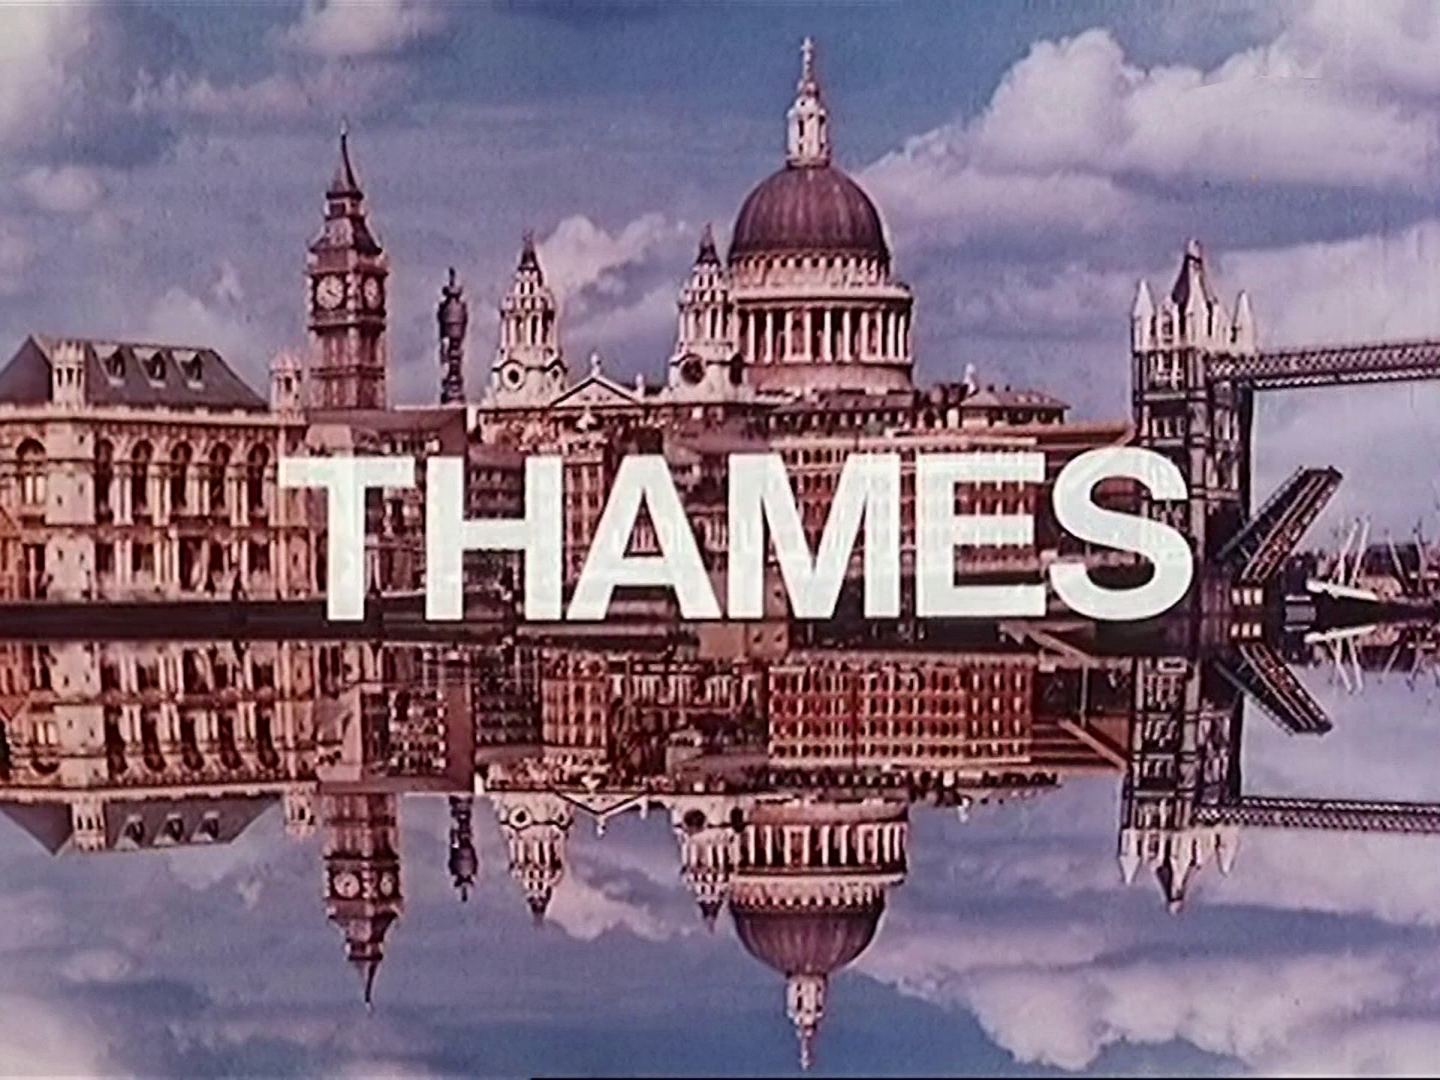 Main title from Quatermass (1979) (1). Thames